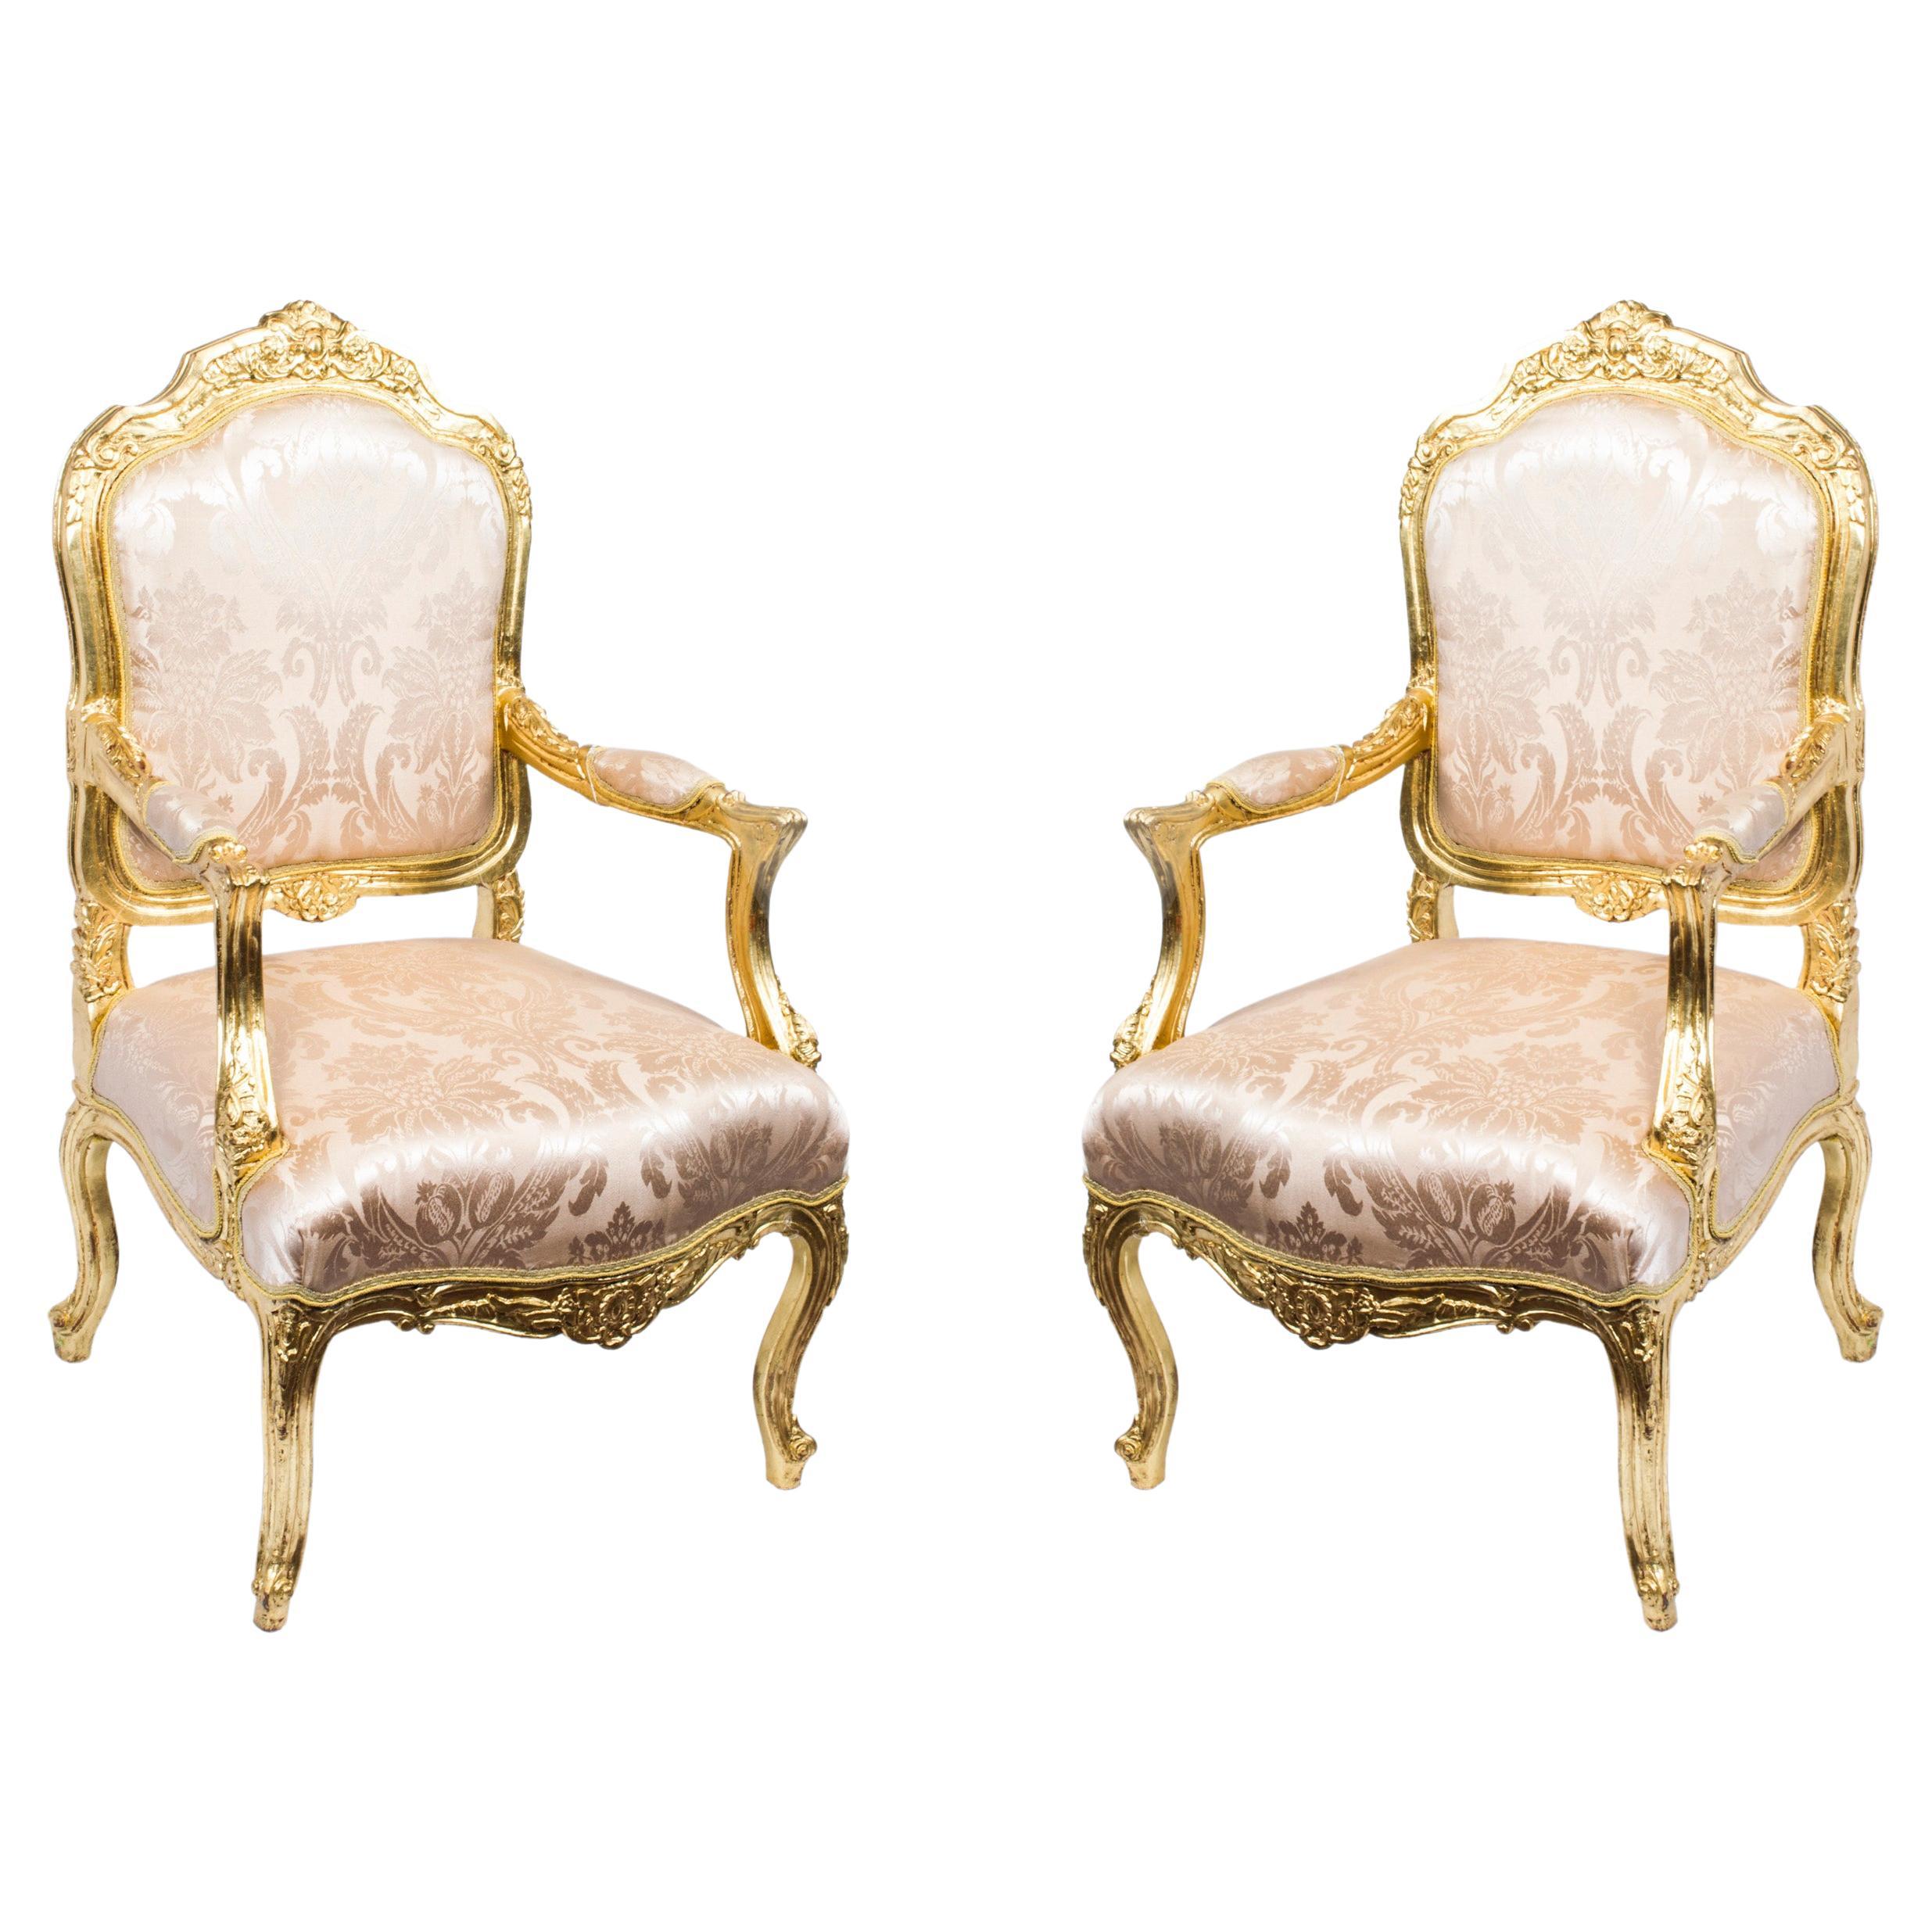 Vintage Pair Louis XV Revival French Gilded Armchairs 20th Century For Sale